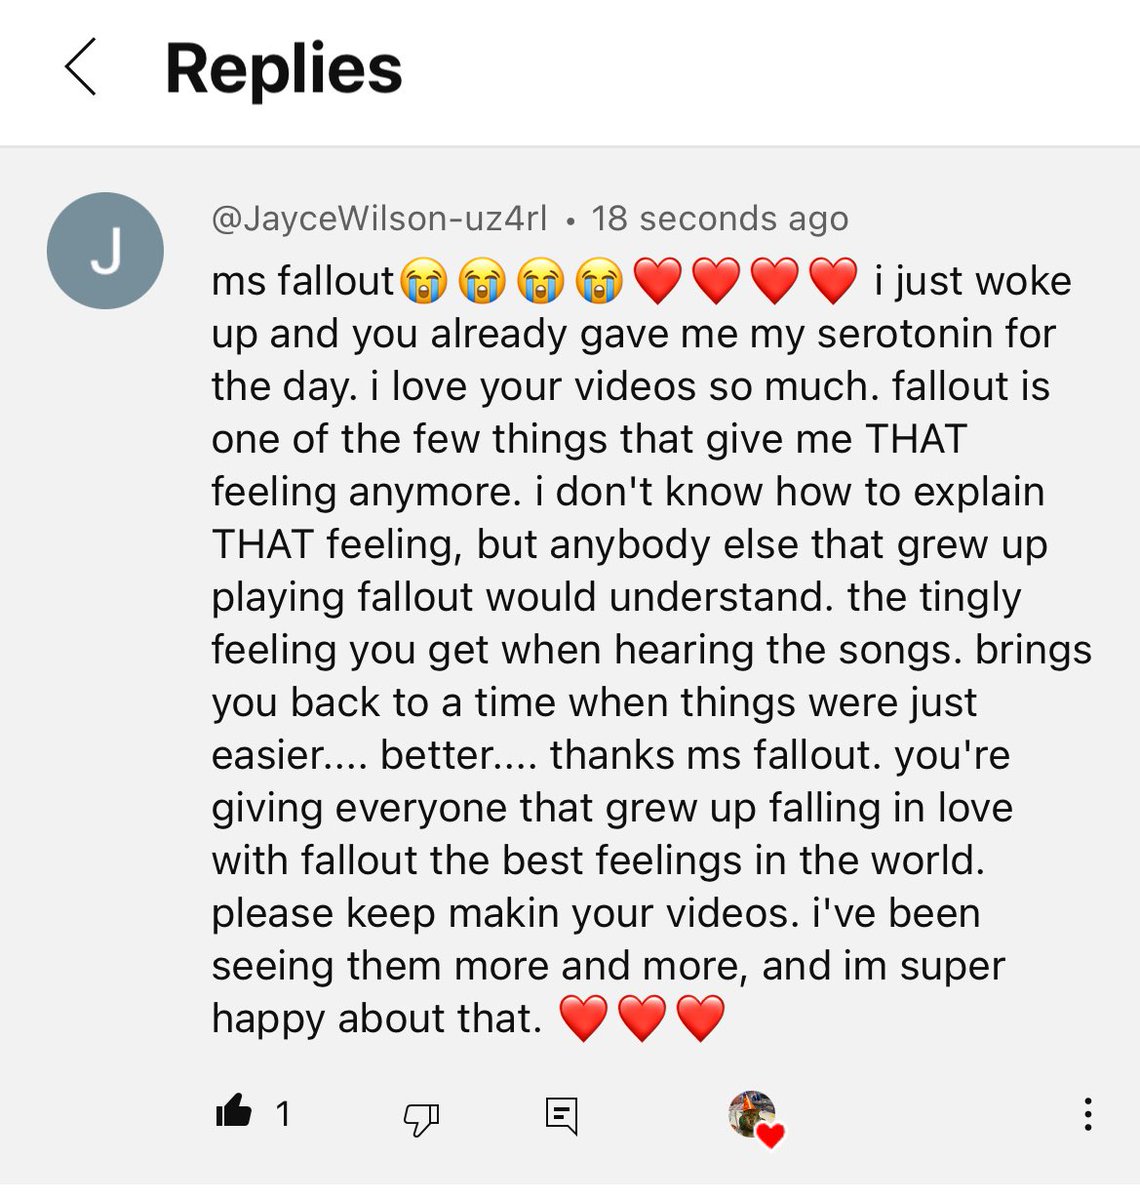 Messages like this make all the work worth it. To know I was able to make someone’s day a little bit better. A reminder to just tell someone/ anyone that they matter, they make a difference in some way, it can mean everything💙 Day officially made🥰 #fallout